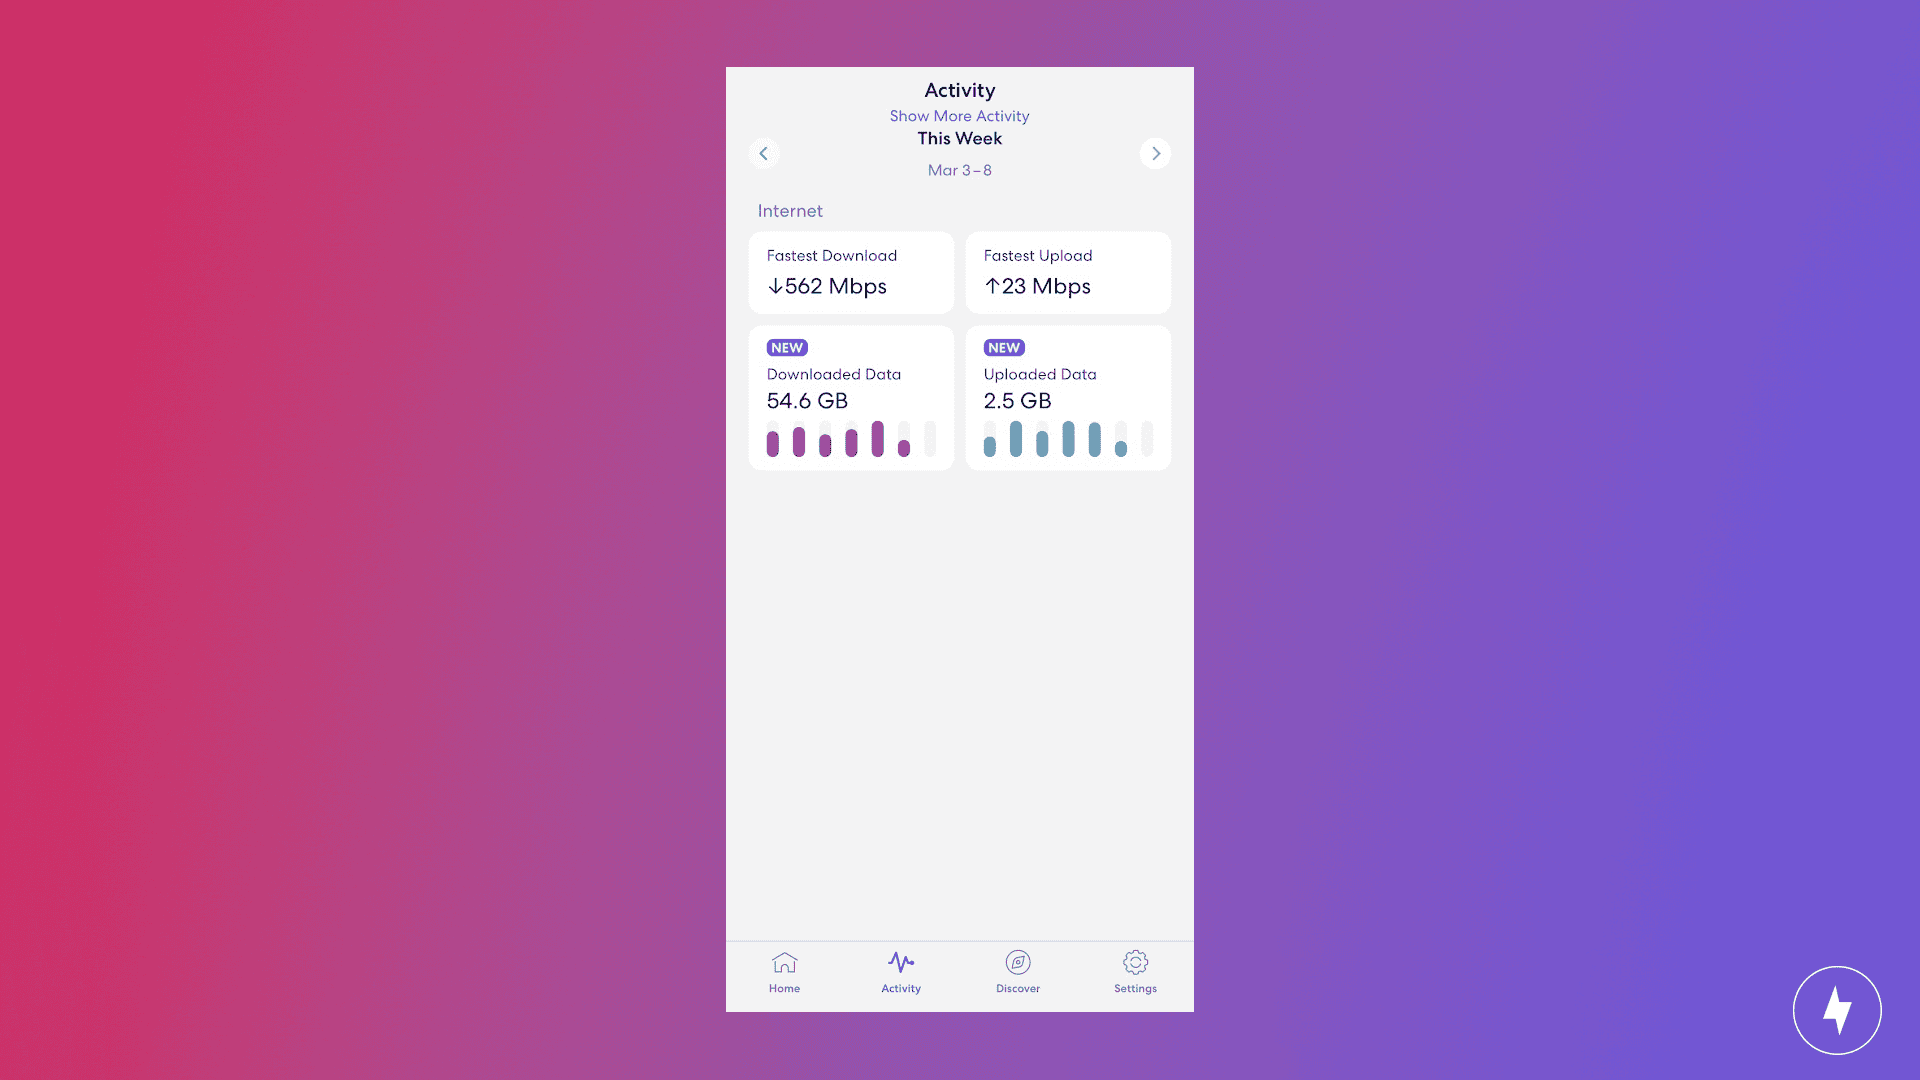 Screenshot of the eero app showing upload and download speeds for an eero Pro 6 router